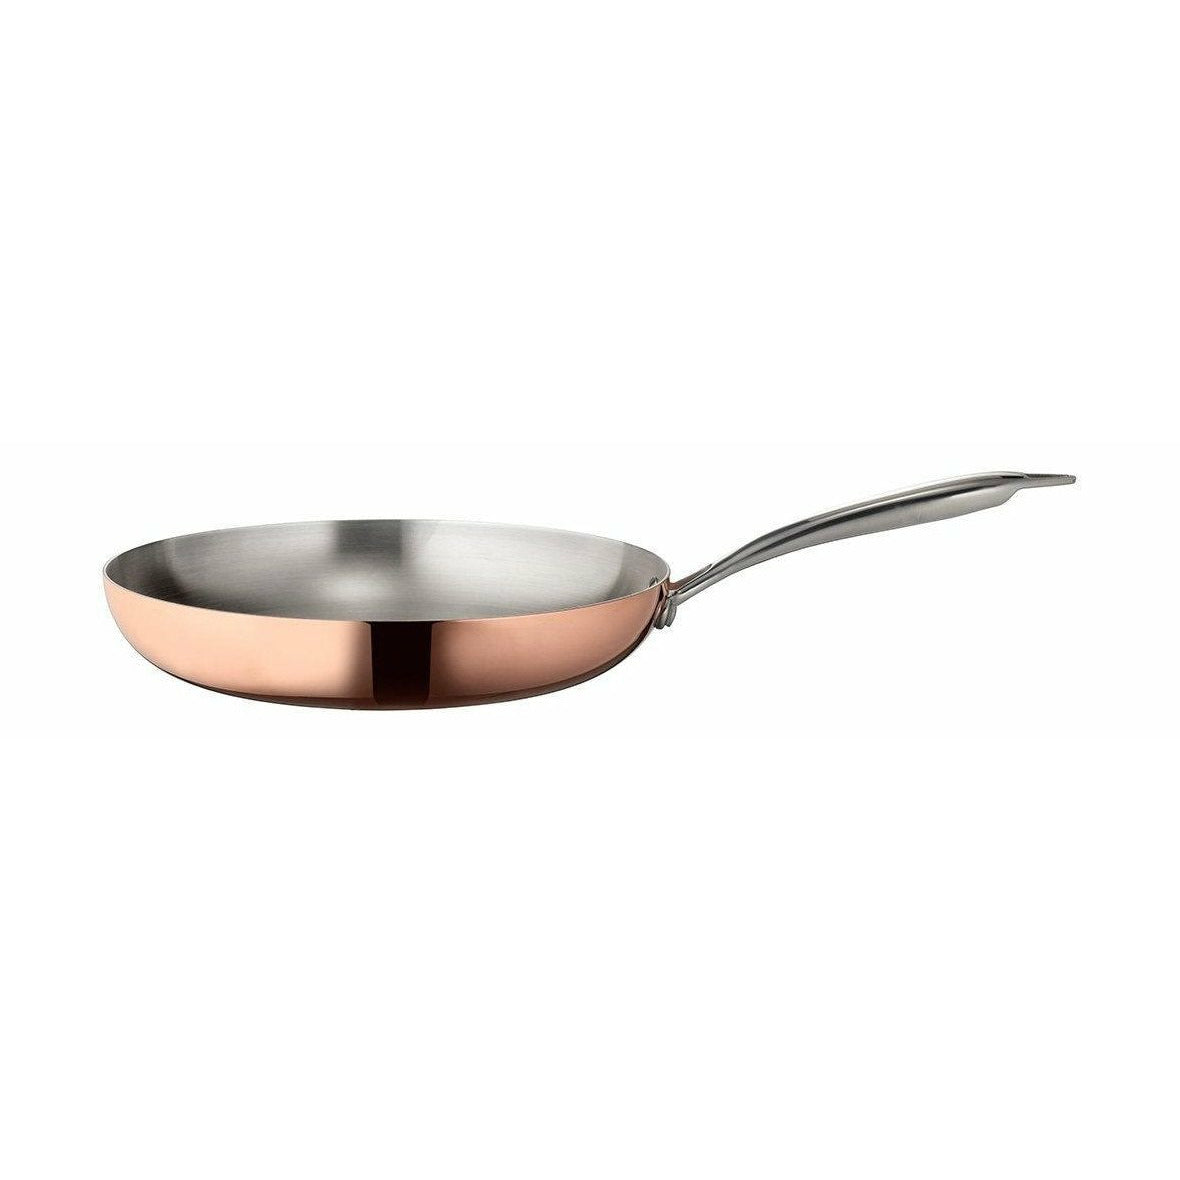 Blomsterbergs Fritting Pan Copper, 28 cm